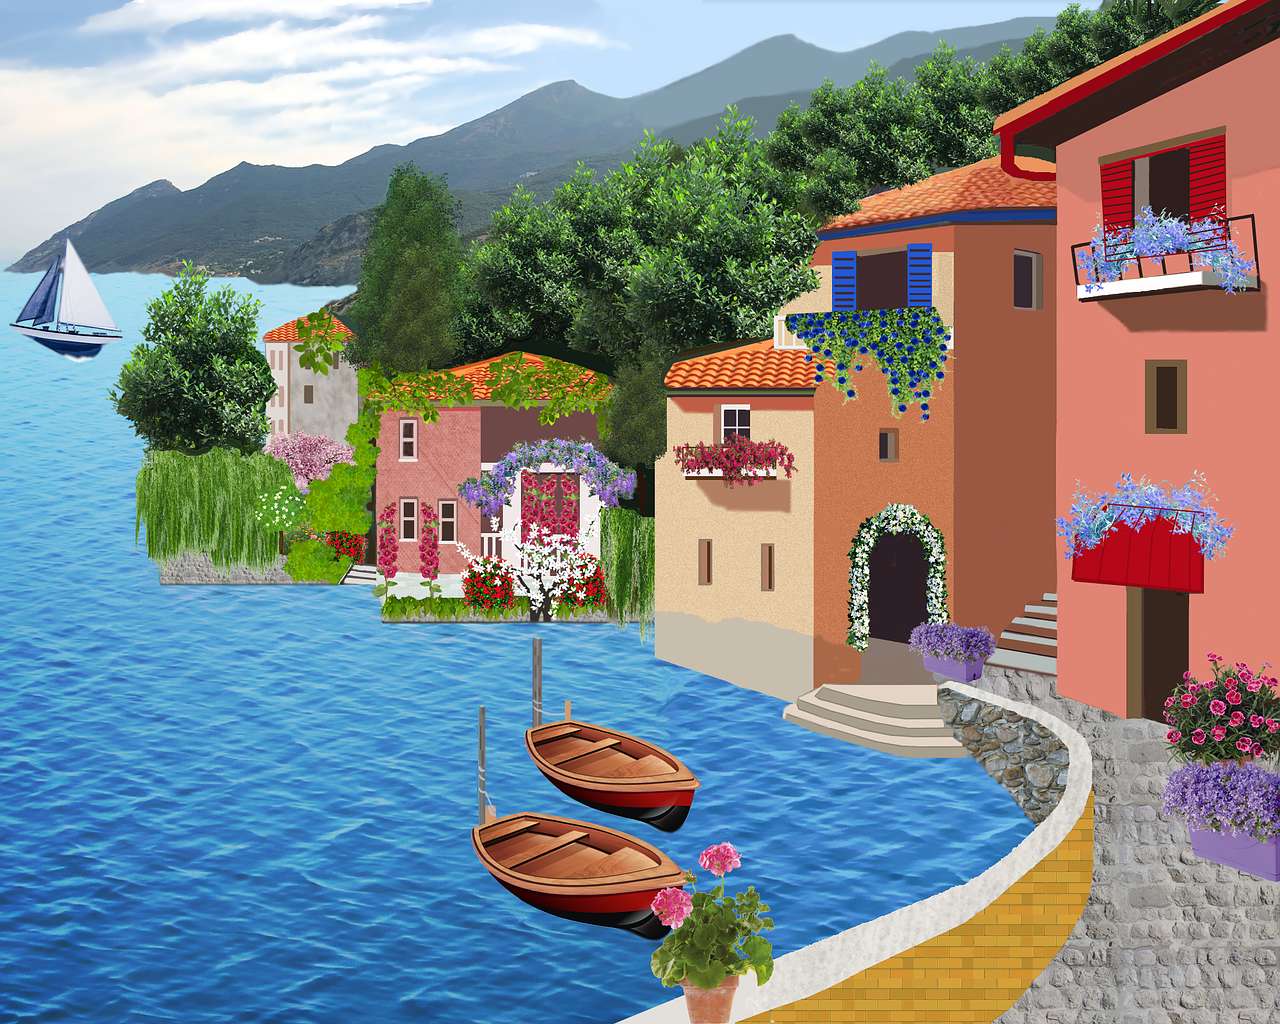 Holidays by a mountain lake (graphics) online puzzle